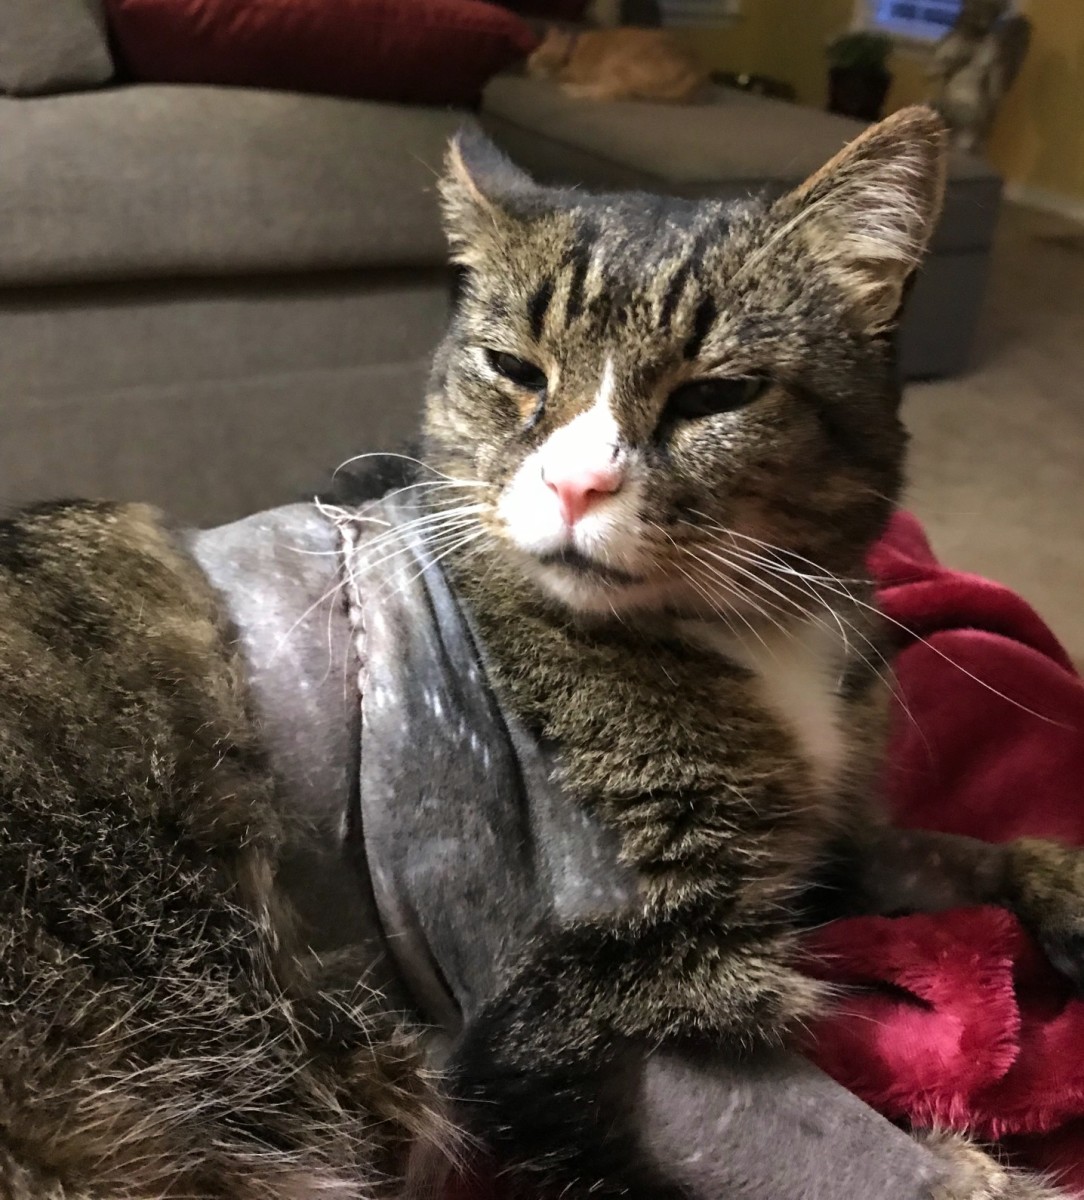 My brave cat Gunter battled sarcoma. He had multiple large tumors removed before ultimately passing away from cancer. We kissed his healed scars and told him how loved he was. (That's his resting grumpy look.)